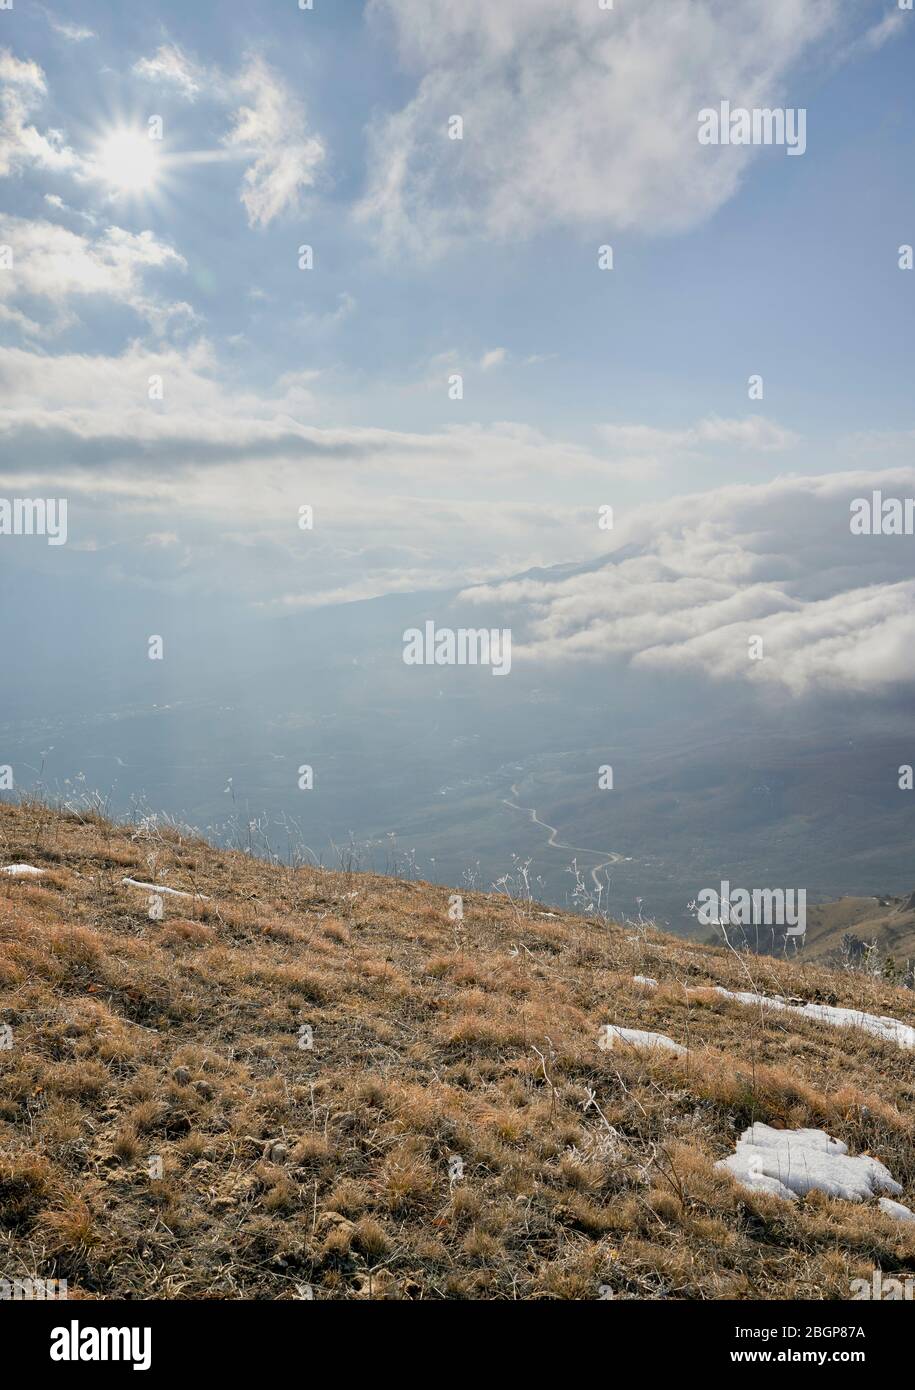 Dry grass. Mountain valley in the background. Vertical layout for local travel stories Stock Photo